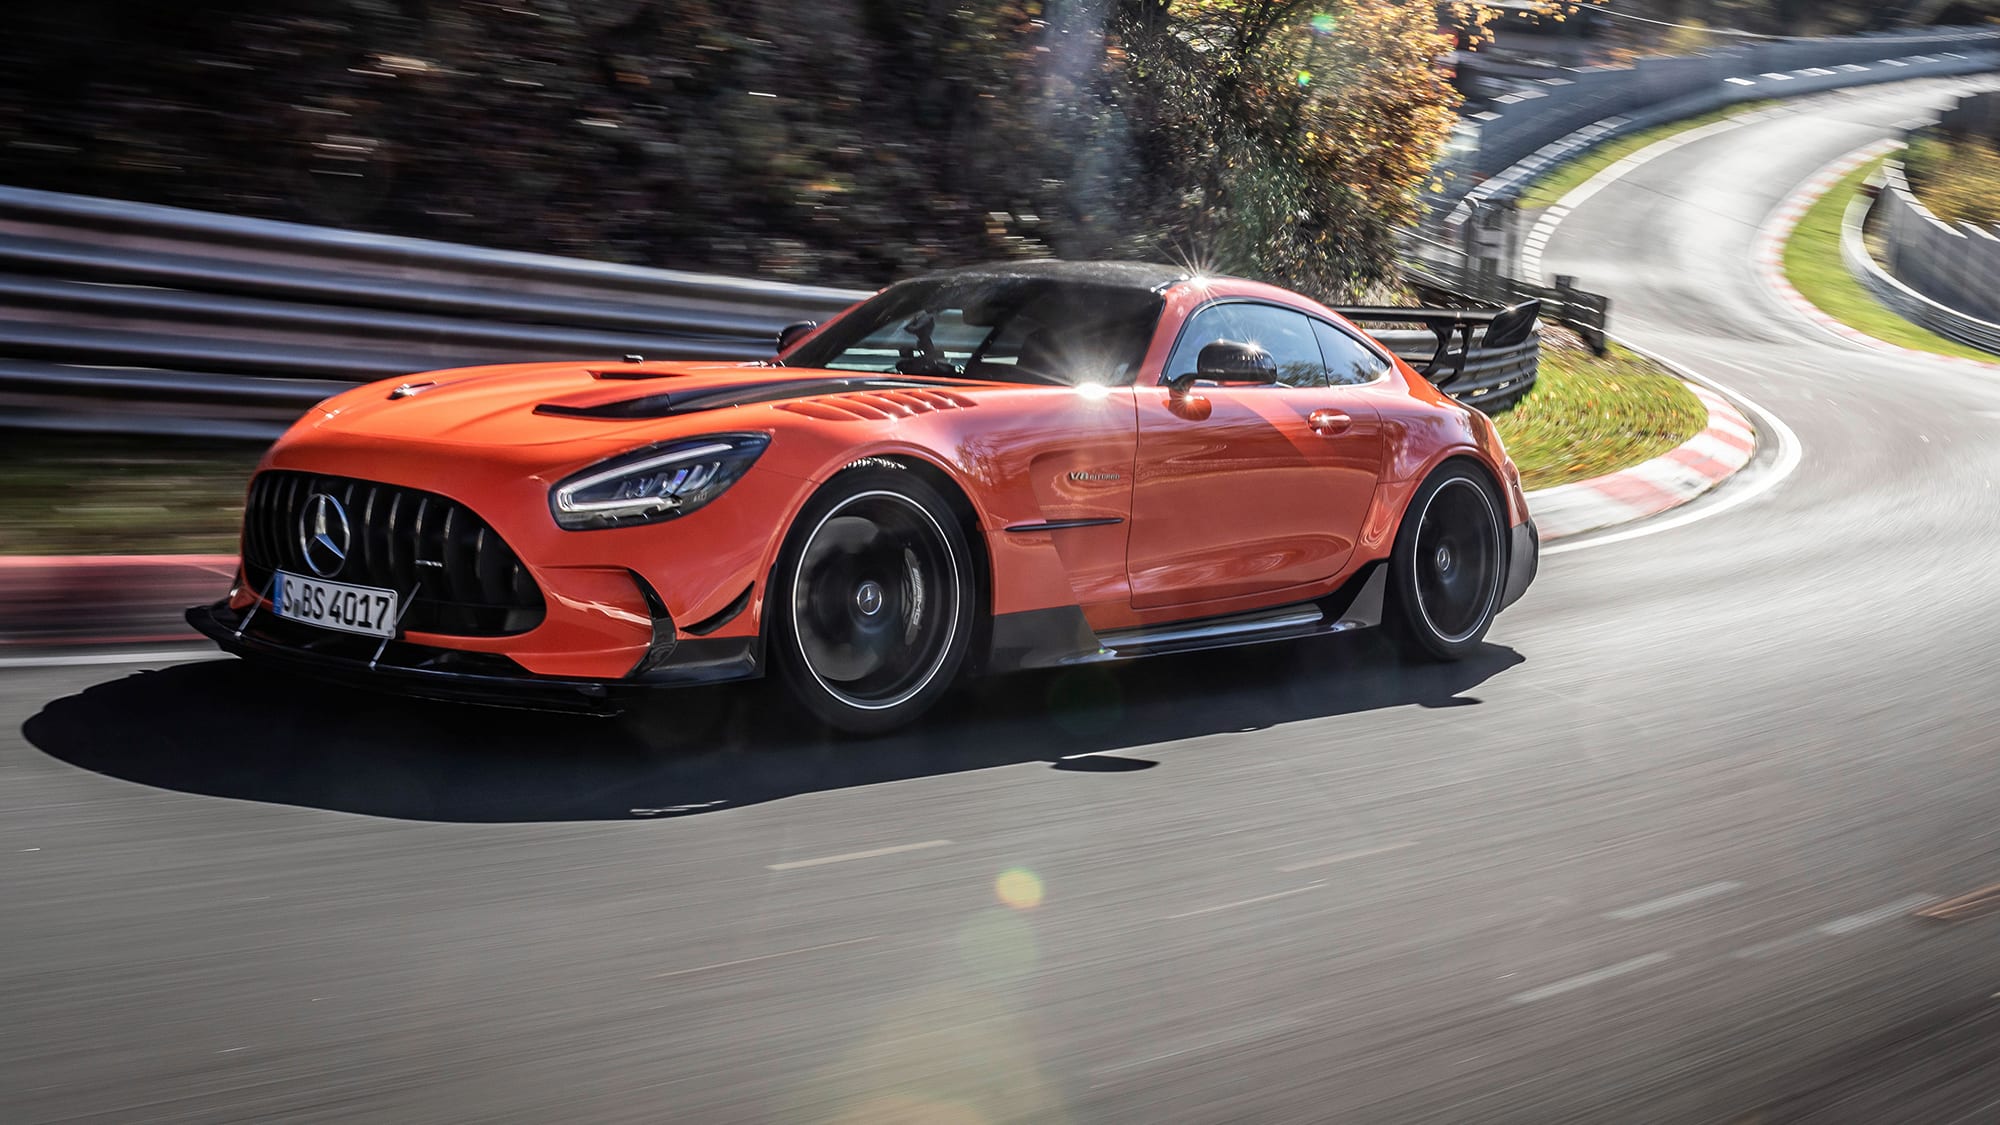 21 Mercedes Amg Gt Black Series Breaks Nurburgring Production Lap Record Caradvice